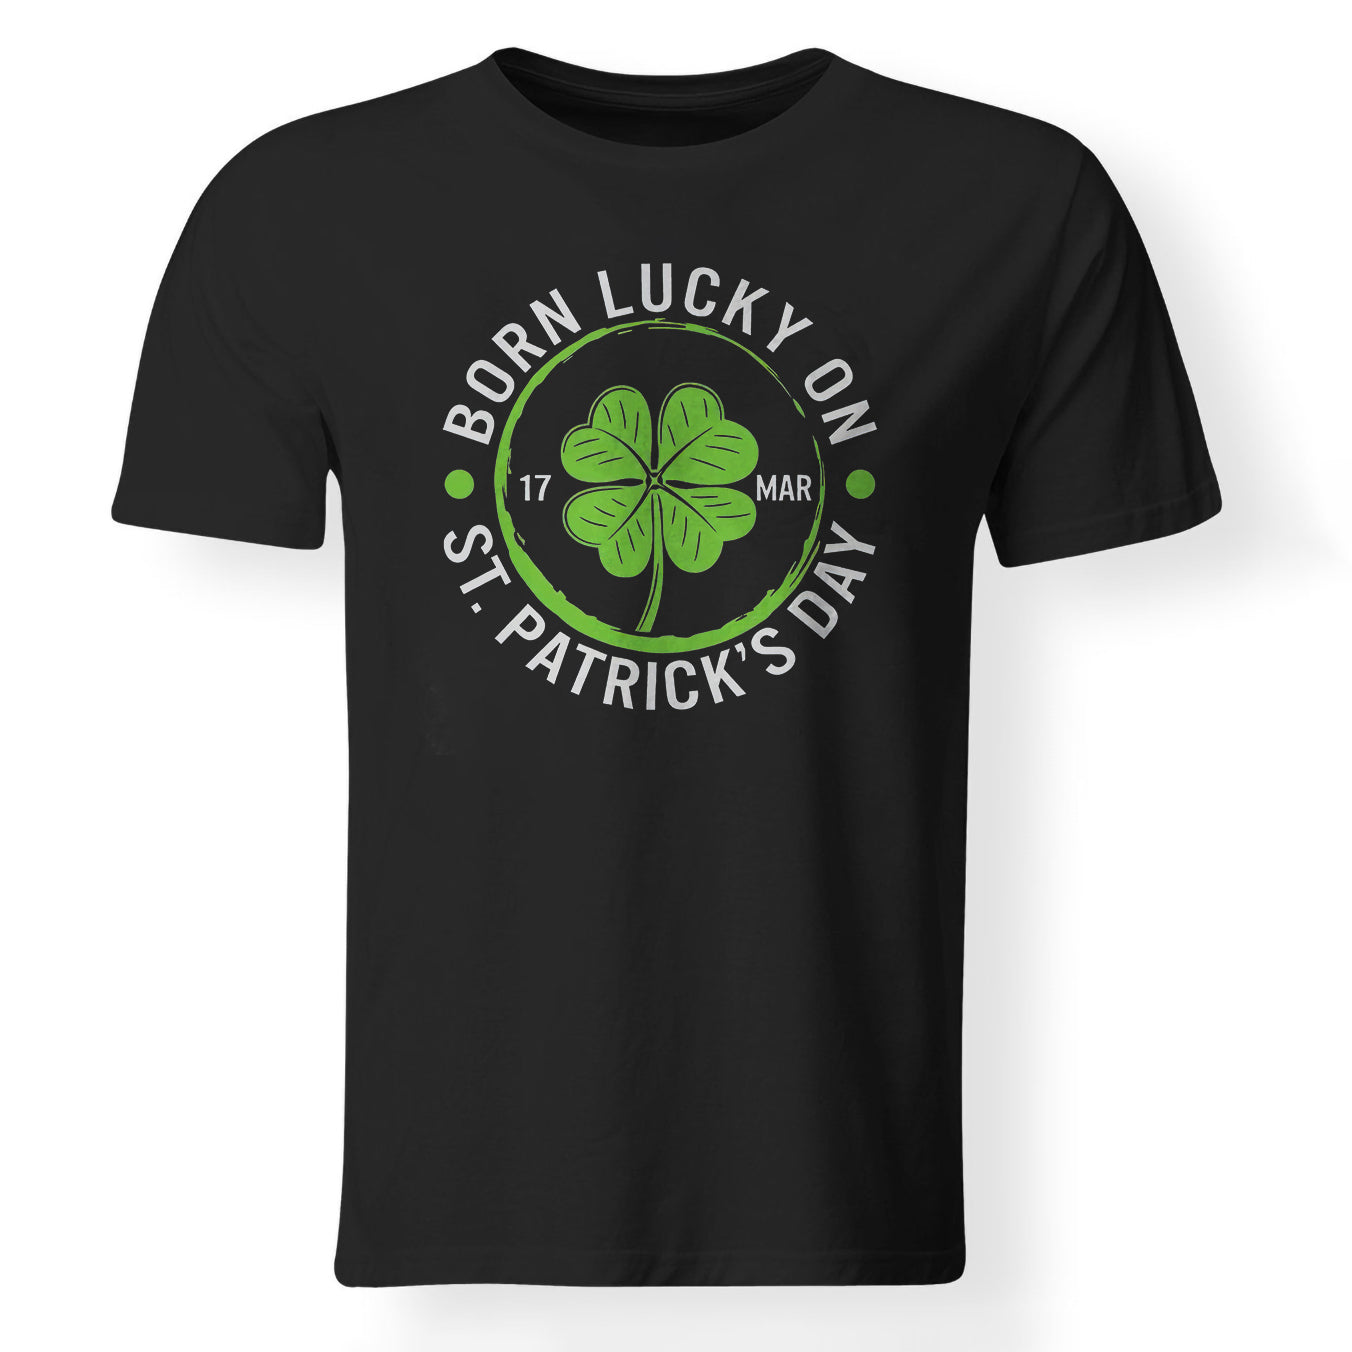 Born Lucky On St. Patrick's Day T-shirt